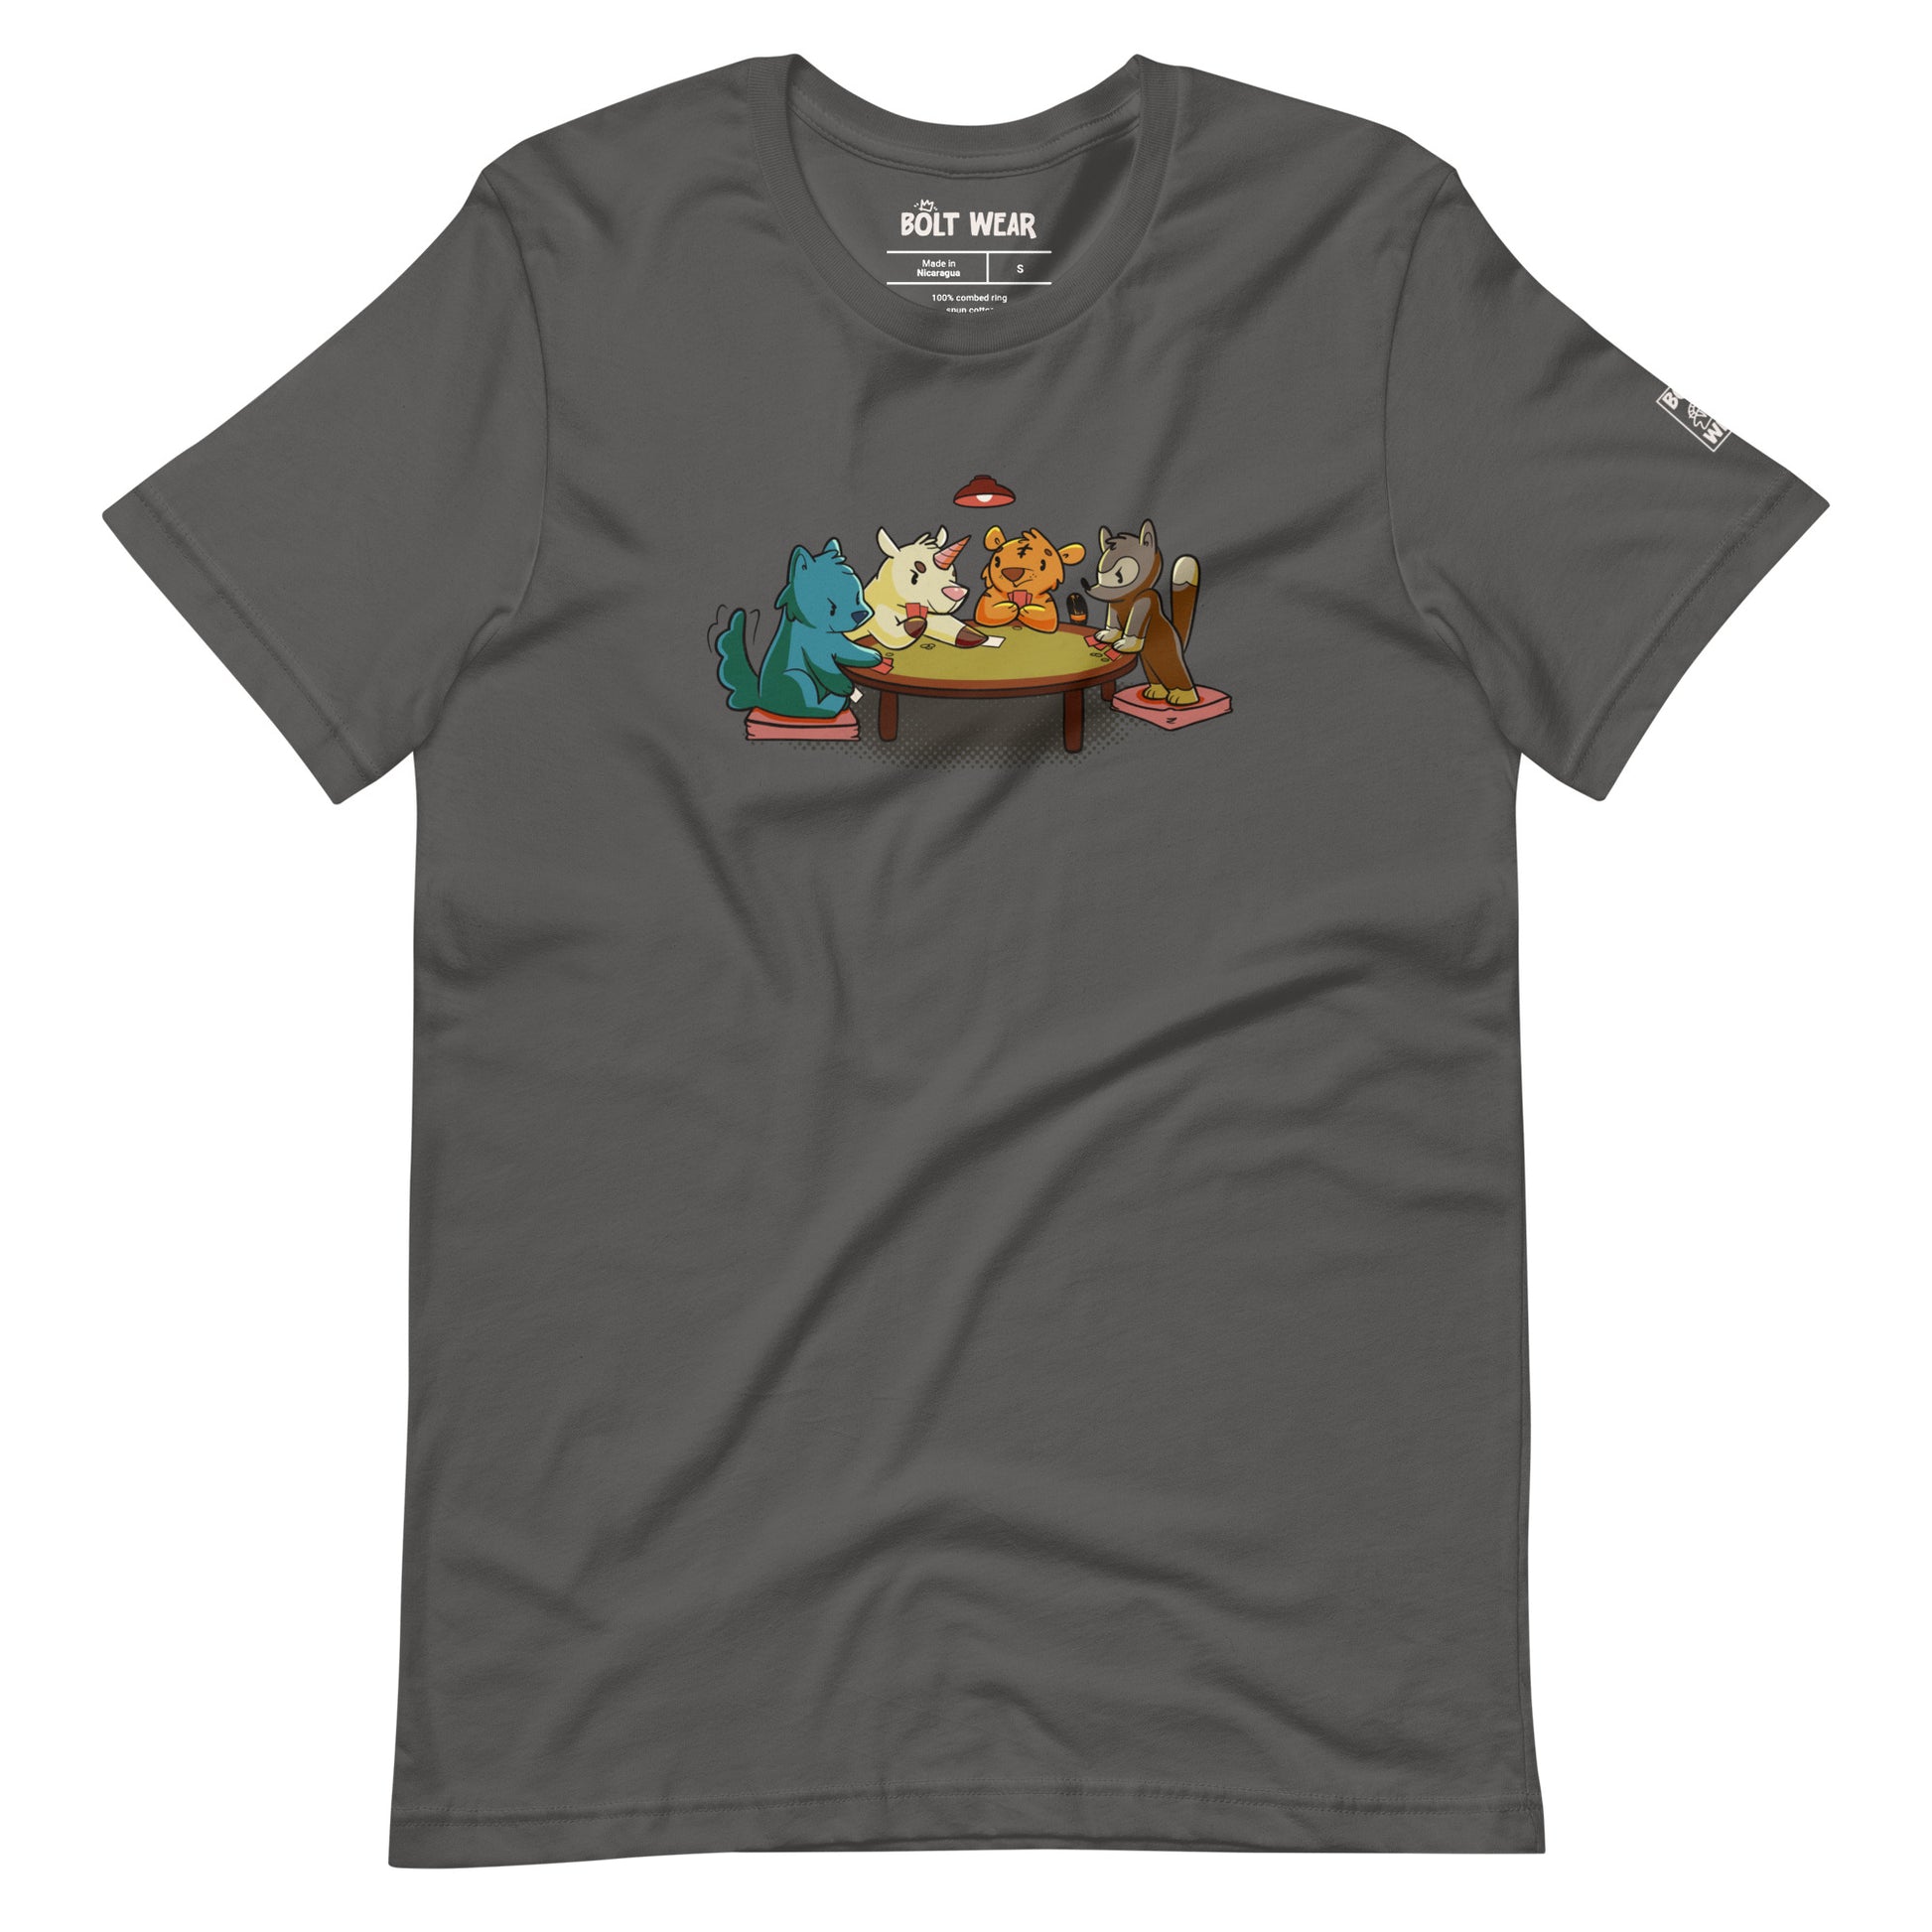 Asphalt grey t-shirt featuring 4 animals, a wolf, a unicorn, a tiger, and a racoon, playing cards around a table